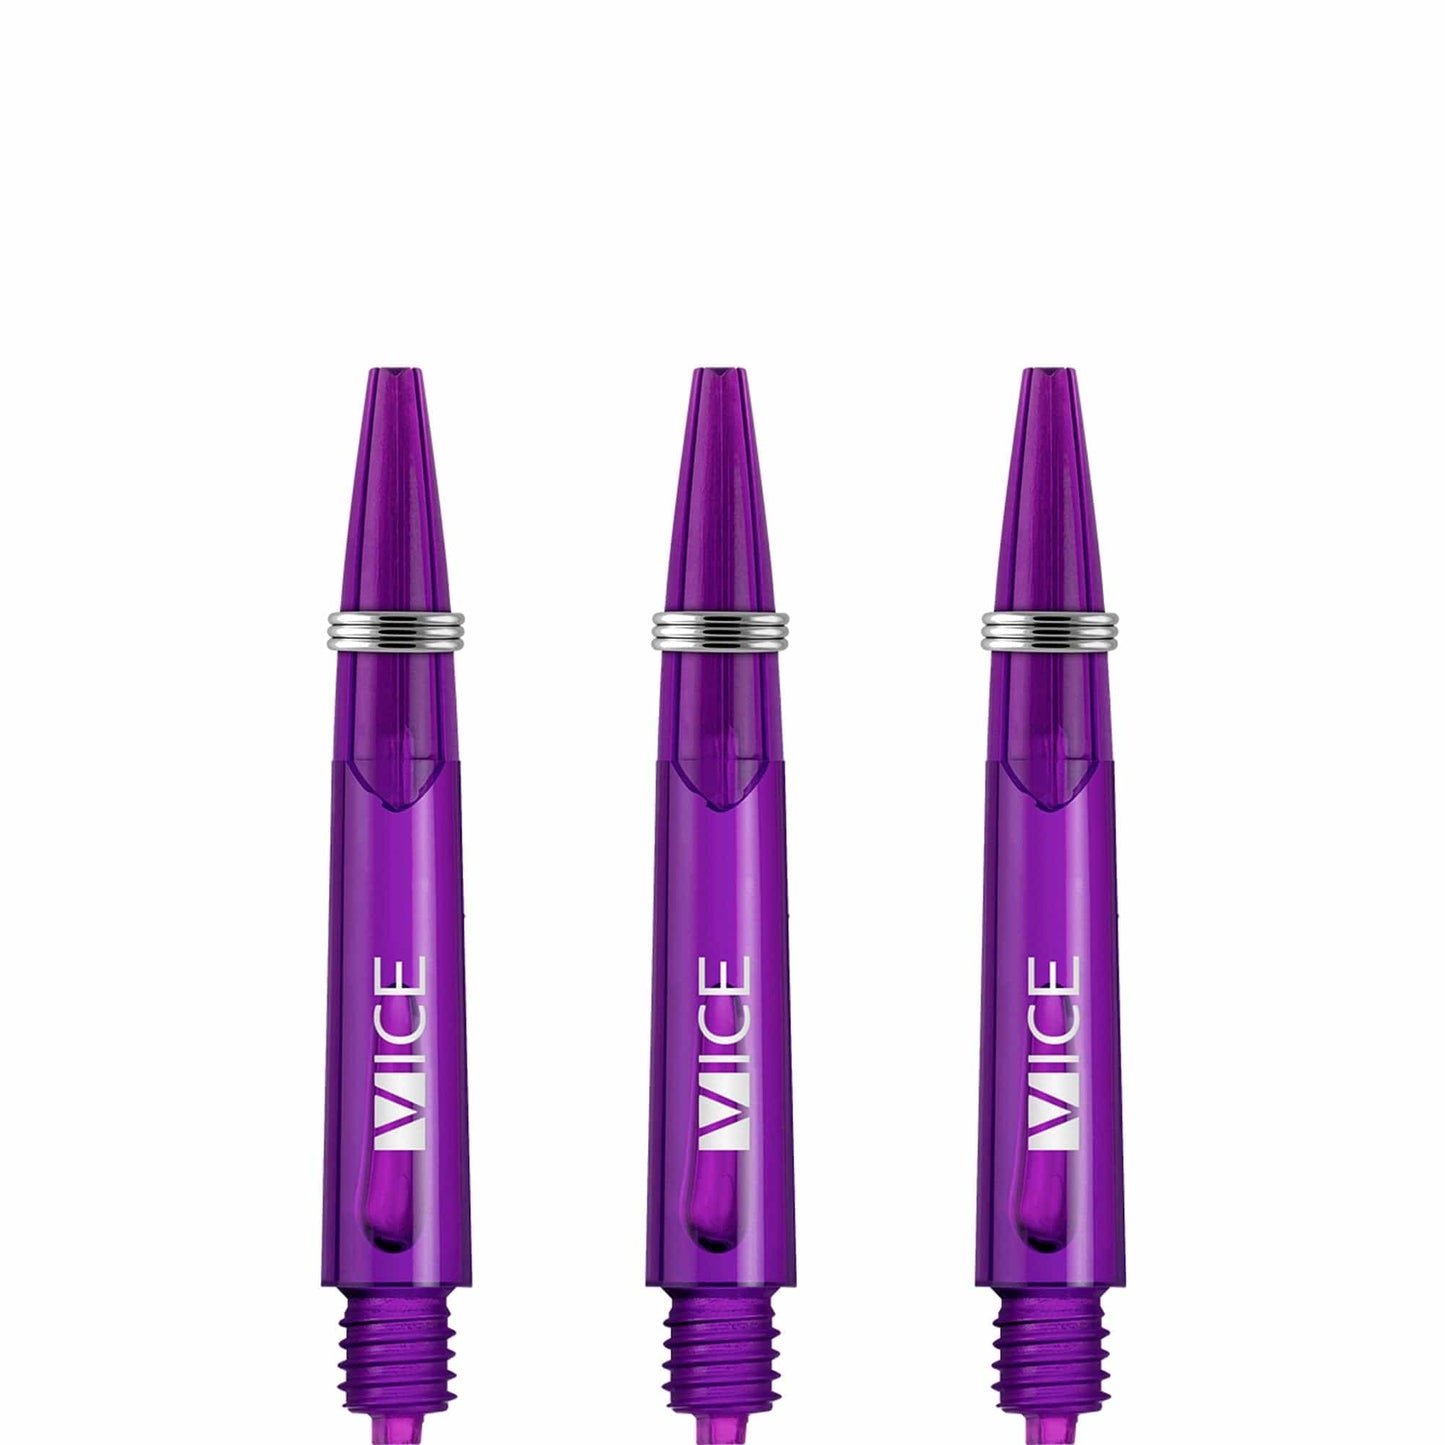 One80 Vice Shafts - Stems with Springs - Purple Short